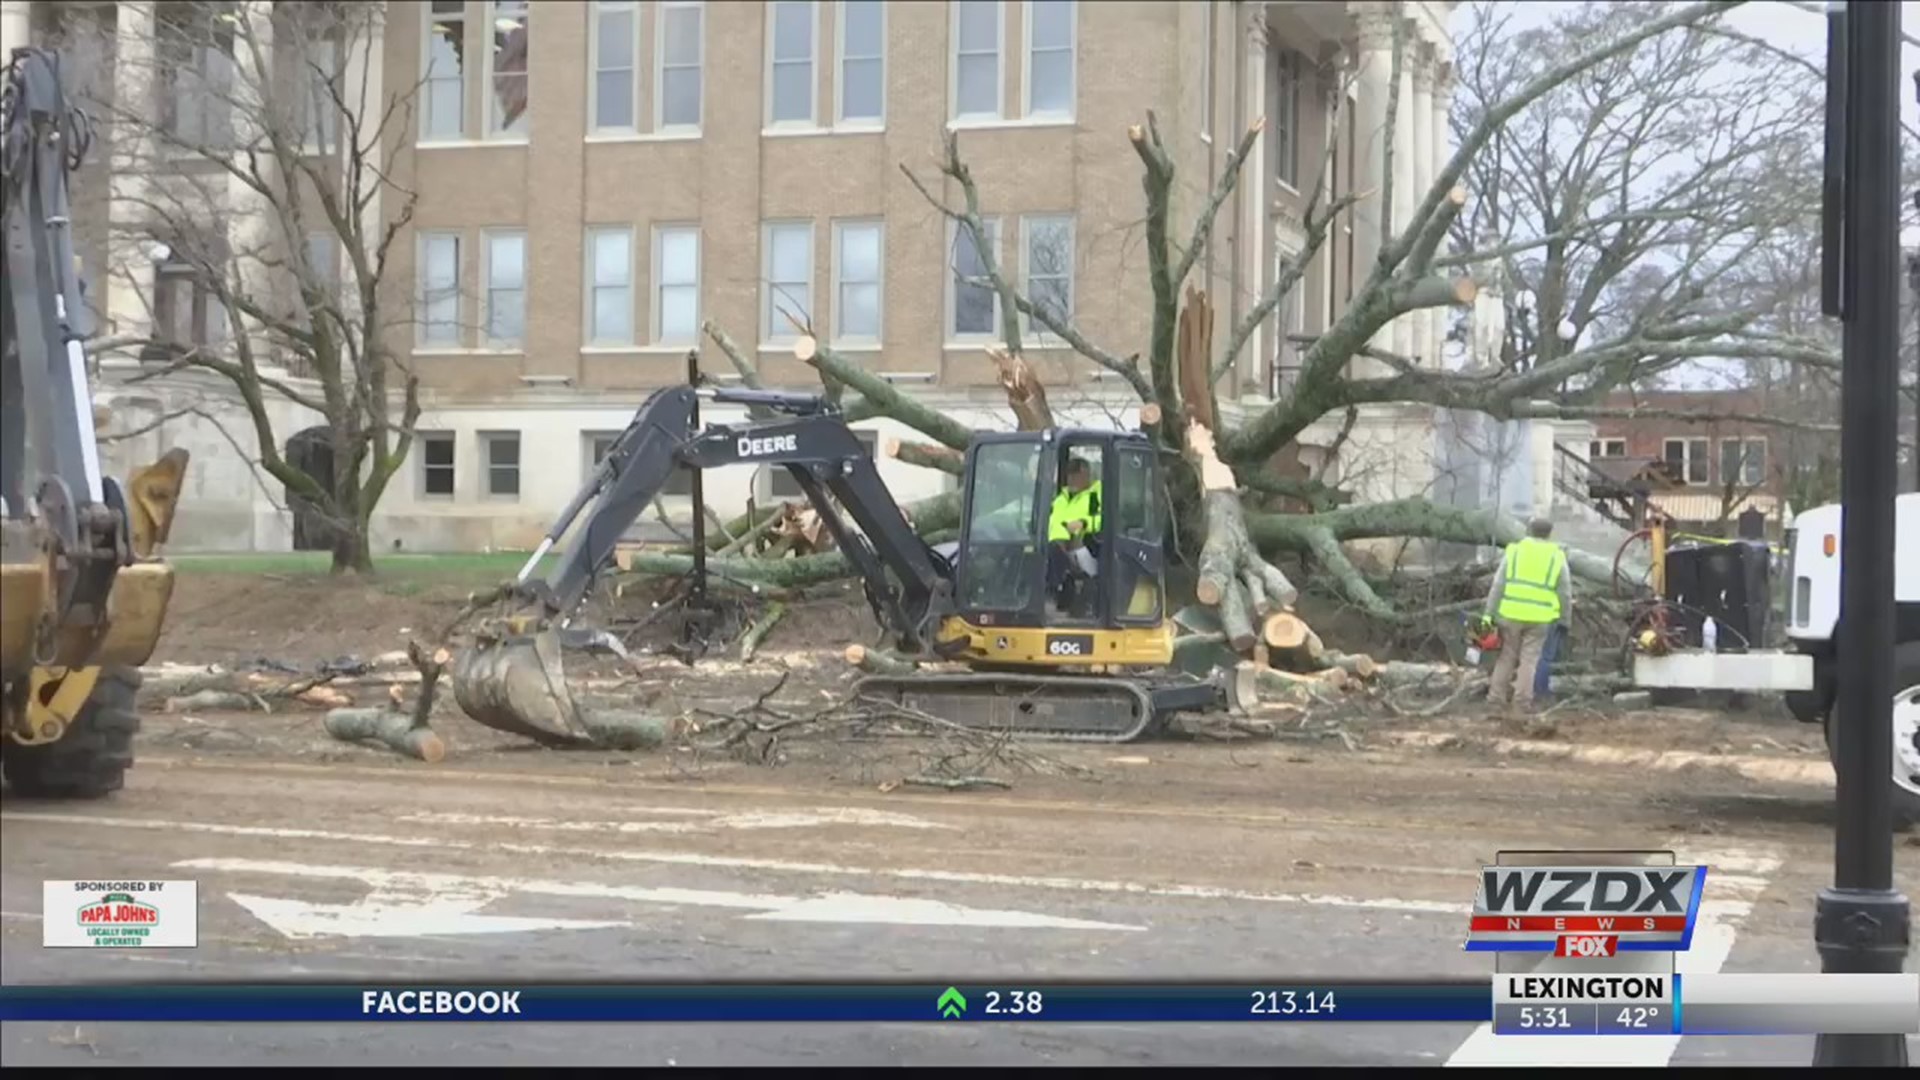 The storm that rolled through Athens knocked down about 10 trees in the city, but the big oak tree stands out among them all. If you got close to the Limestone County Courthouse on Thursday, there's no doubt you saw crews removing the big oak tree that stood in front of the building.